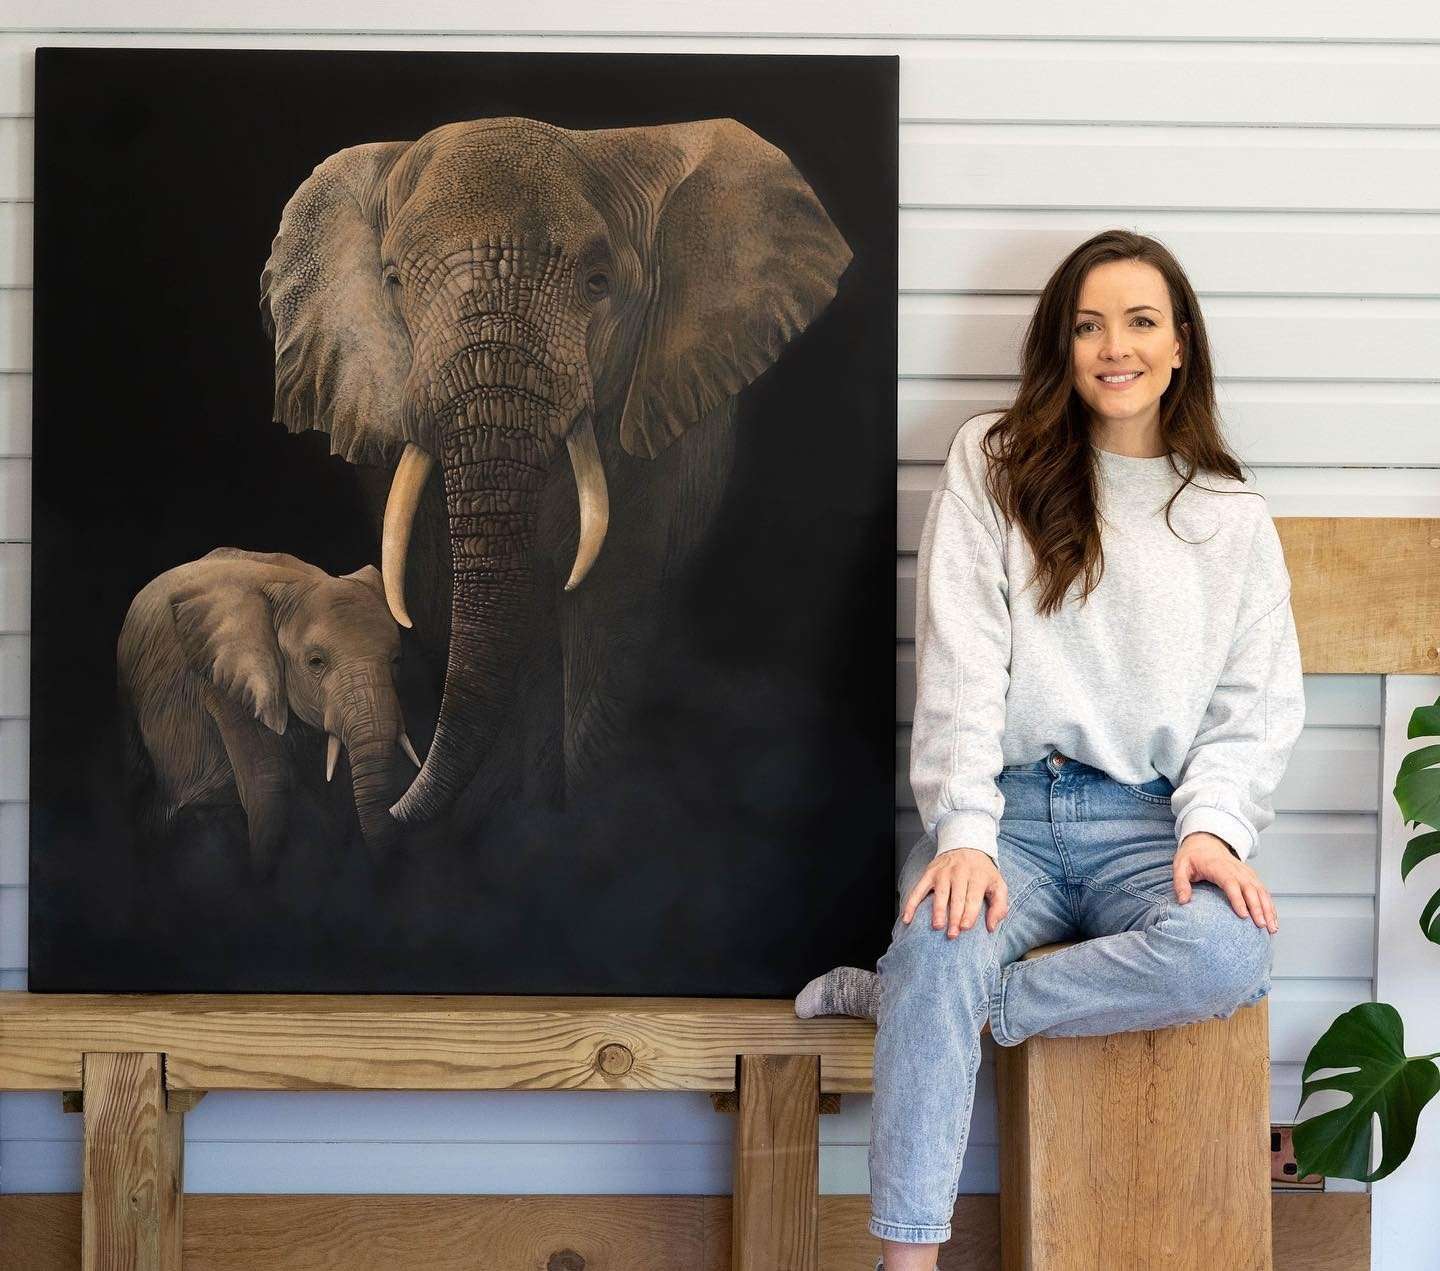 The UK-based artist creates realistic animal paintings to promote wildlife conservation